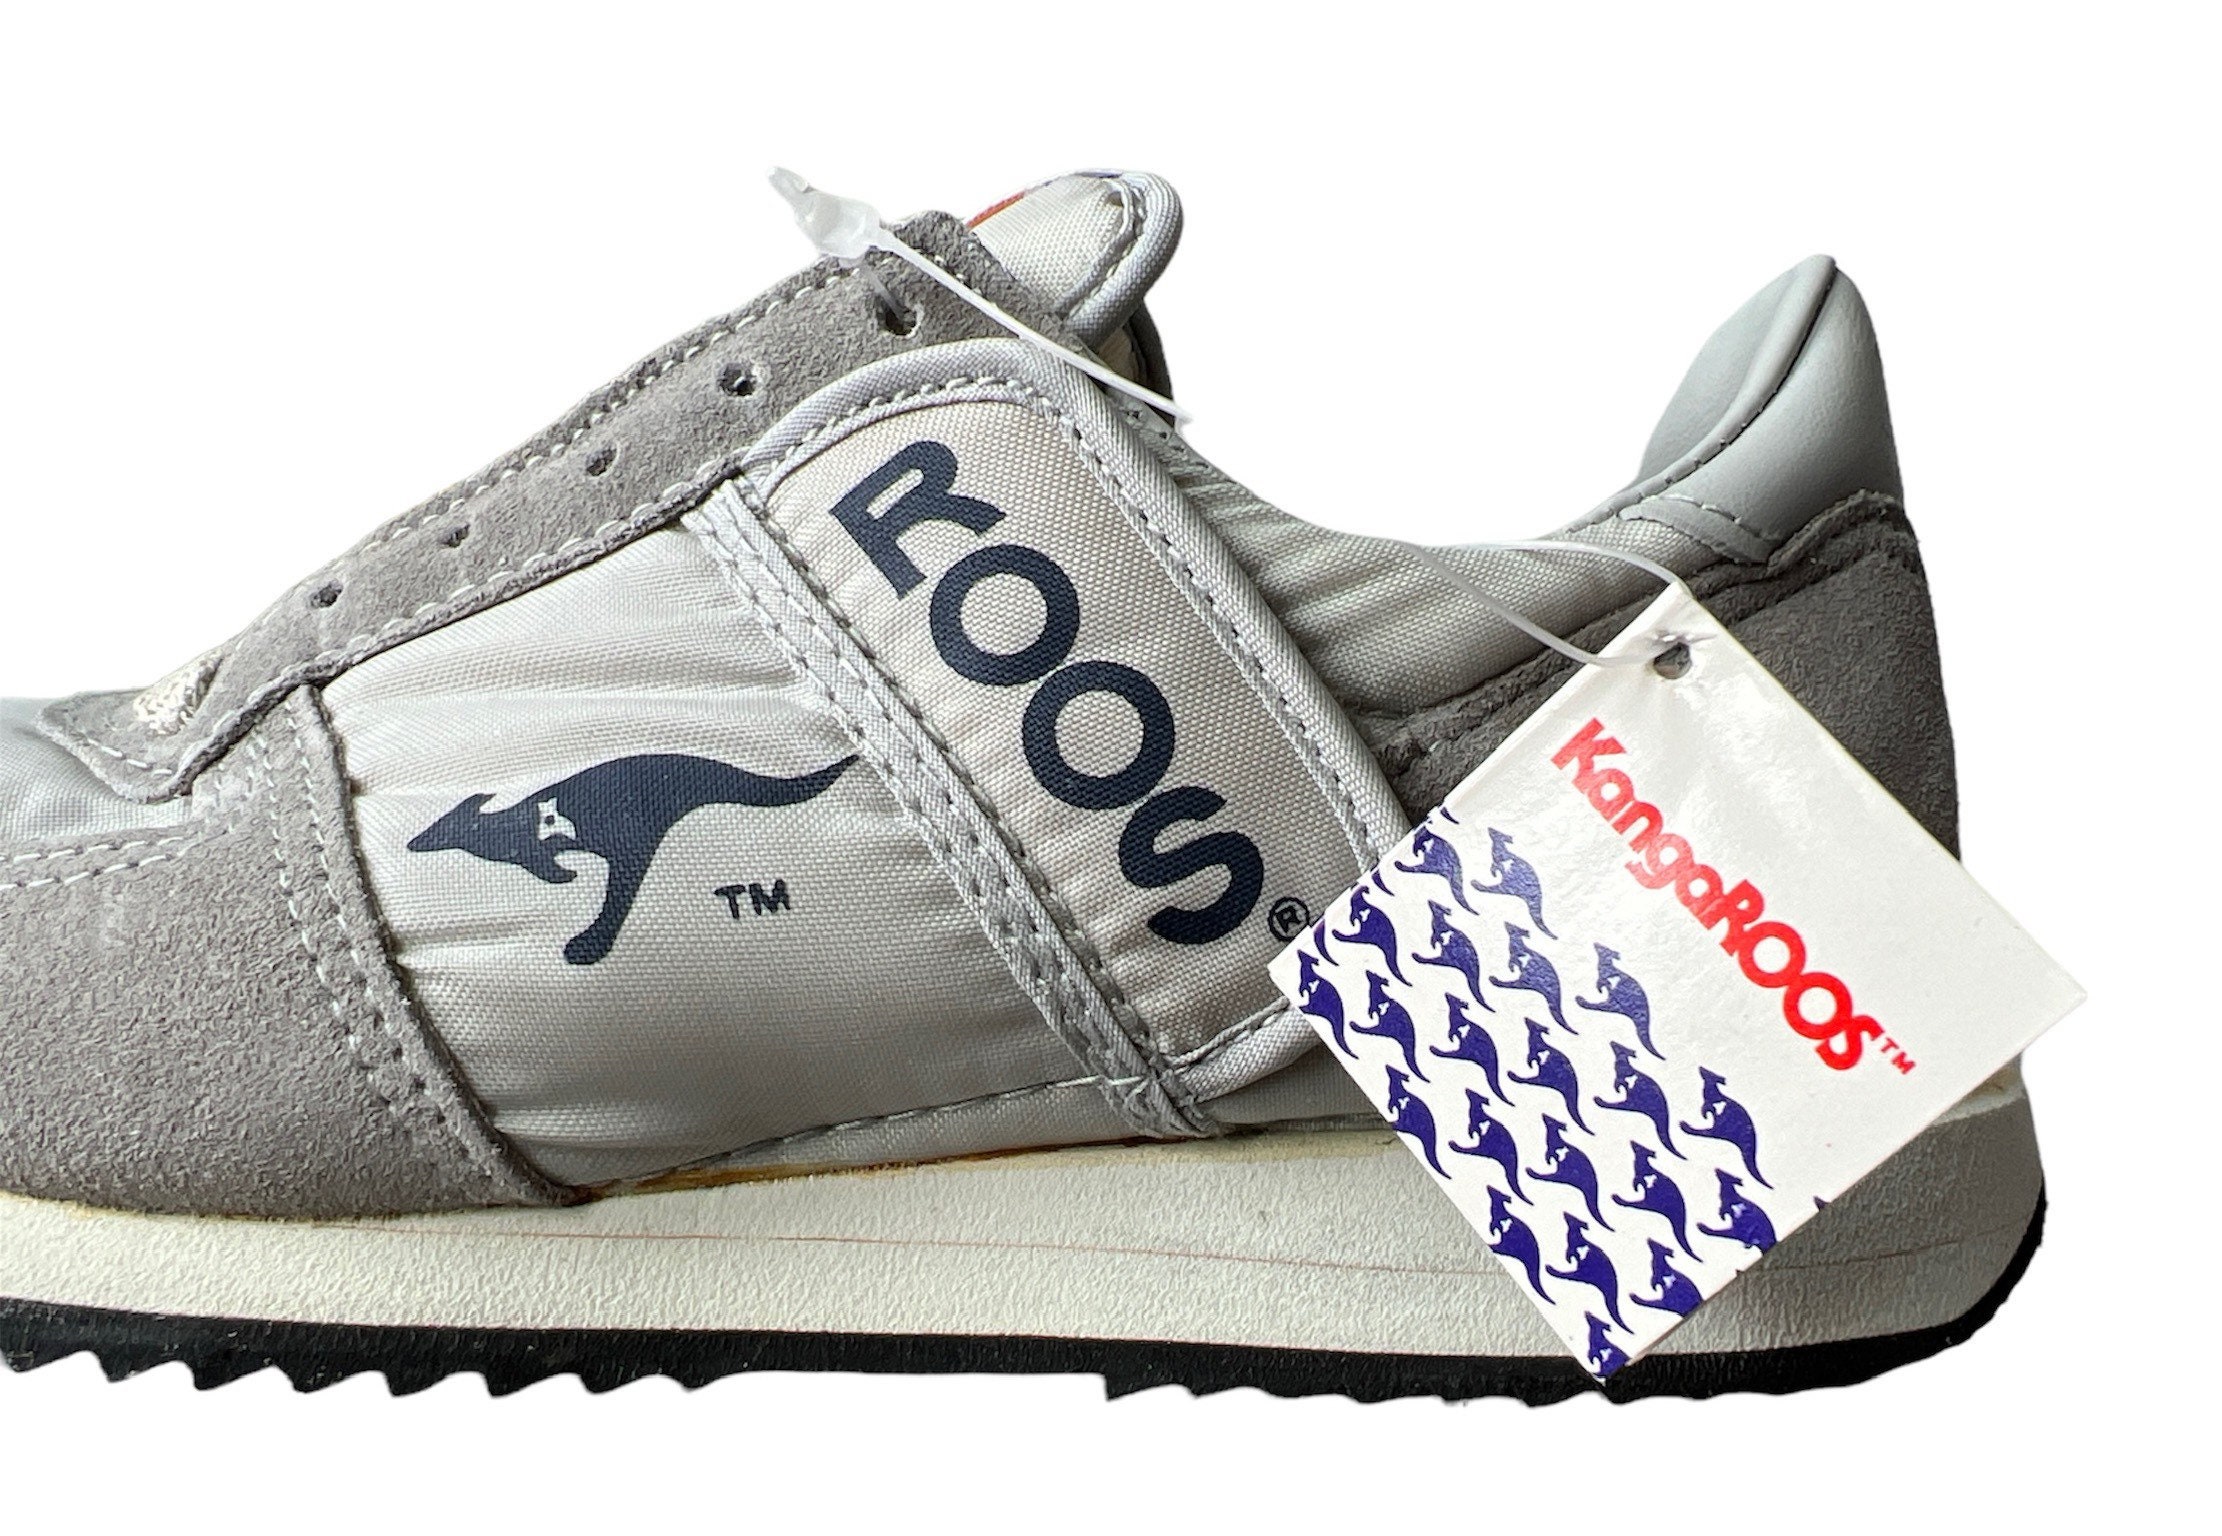 Kangaroos (Roos) Velcro shoes with pockets, 1980s